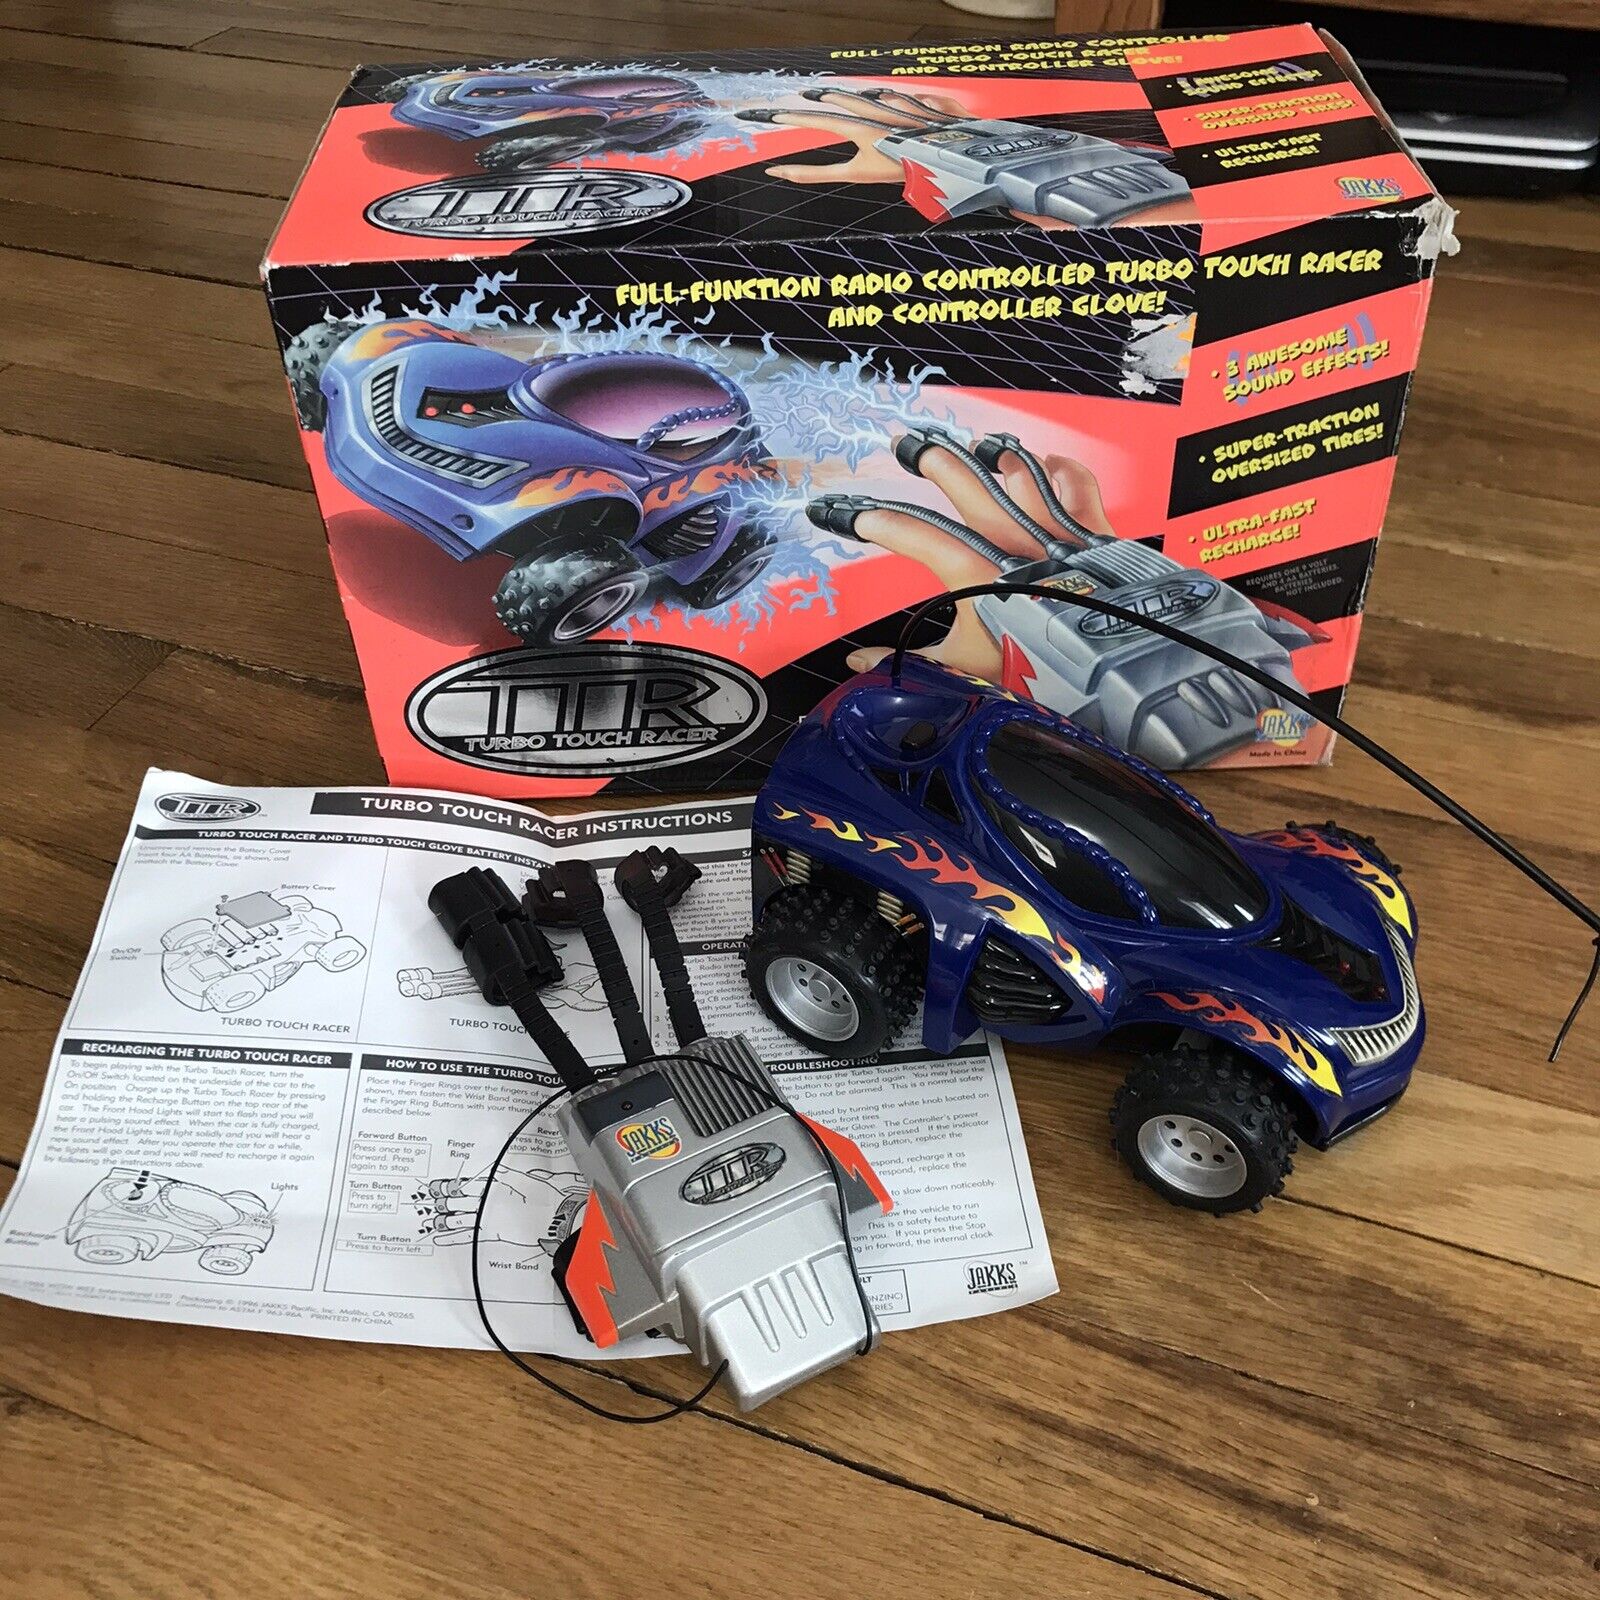 Turbo Touch Racer Remote Controlled RC Car Jakks Pacific 1996 Working Complete